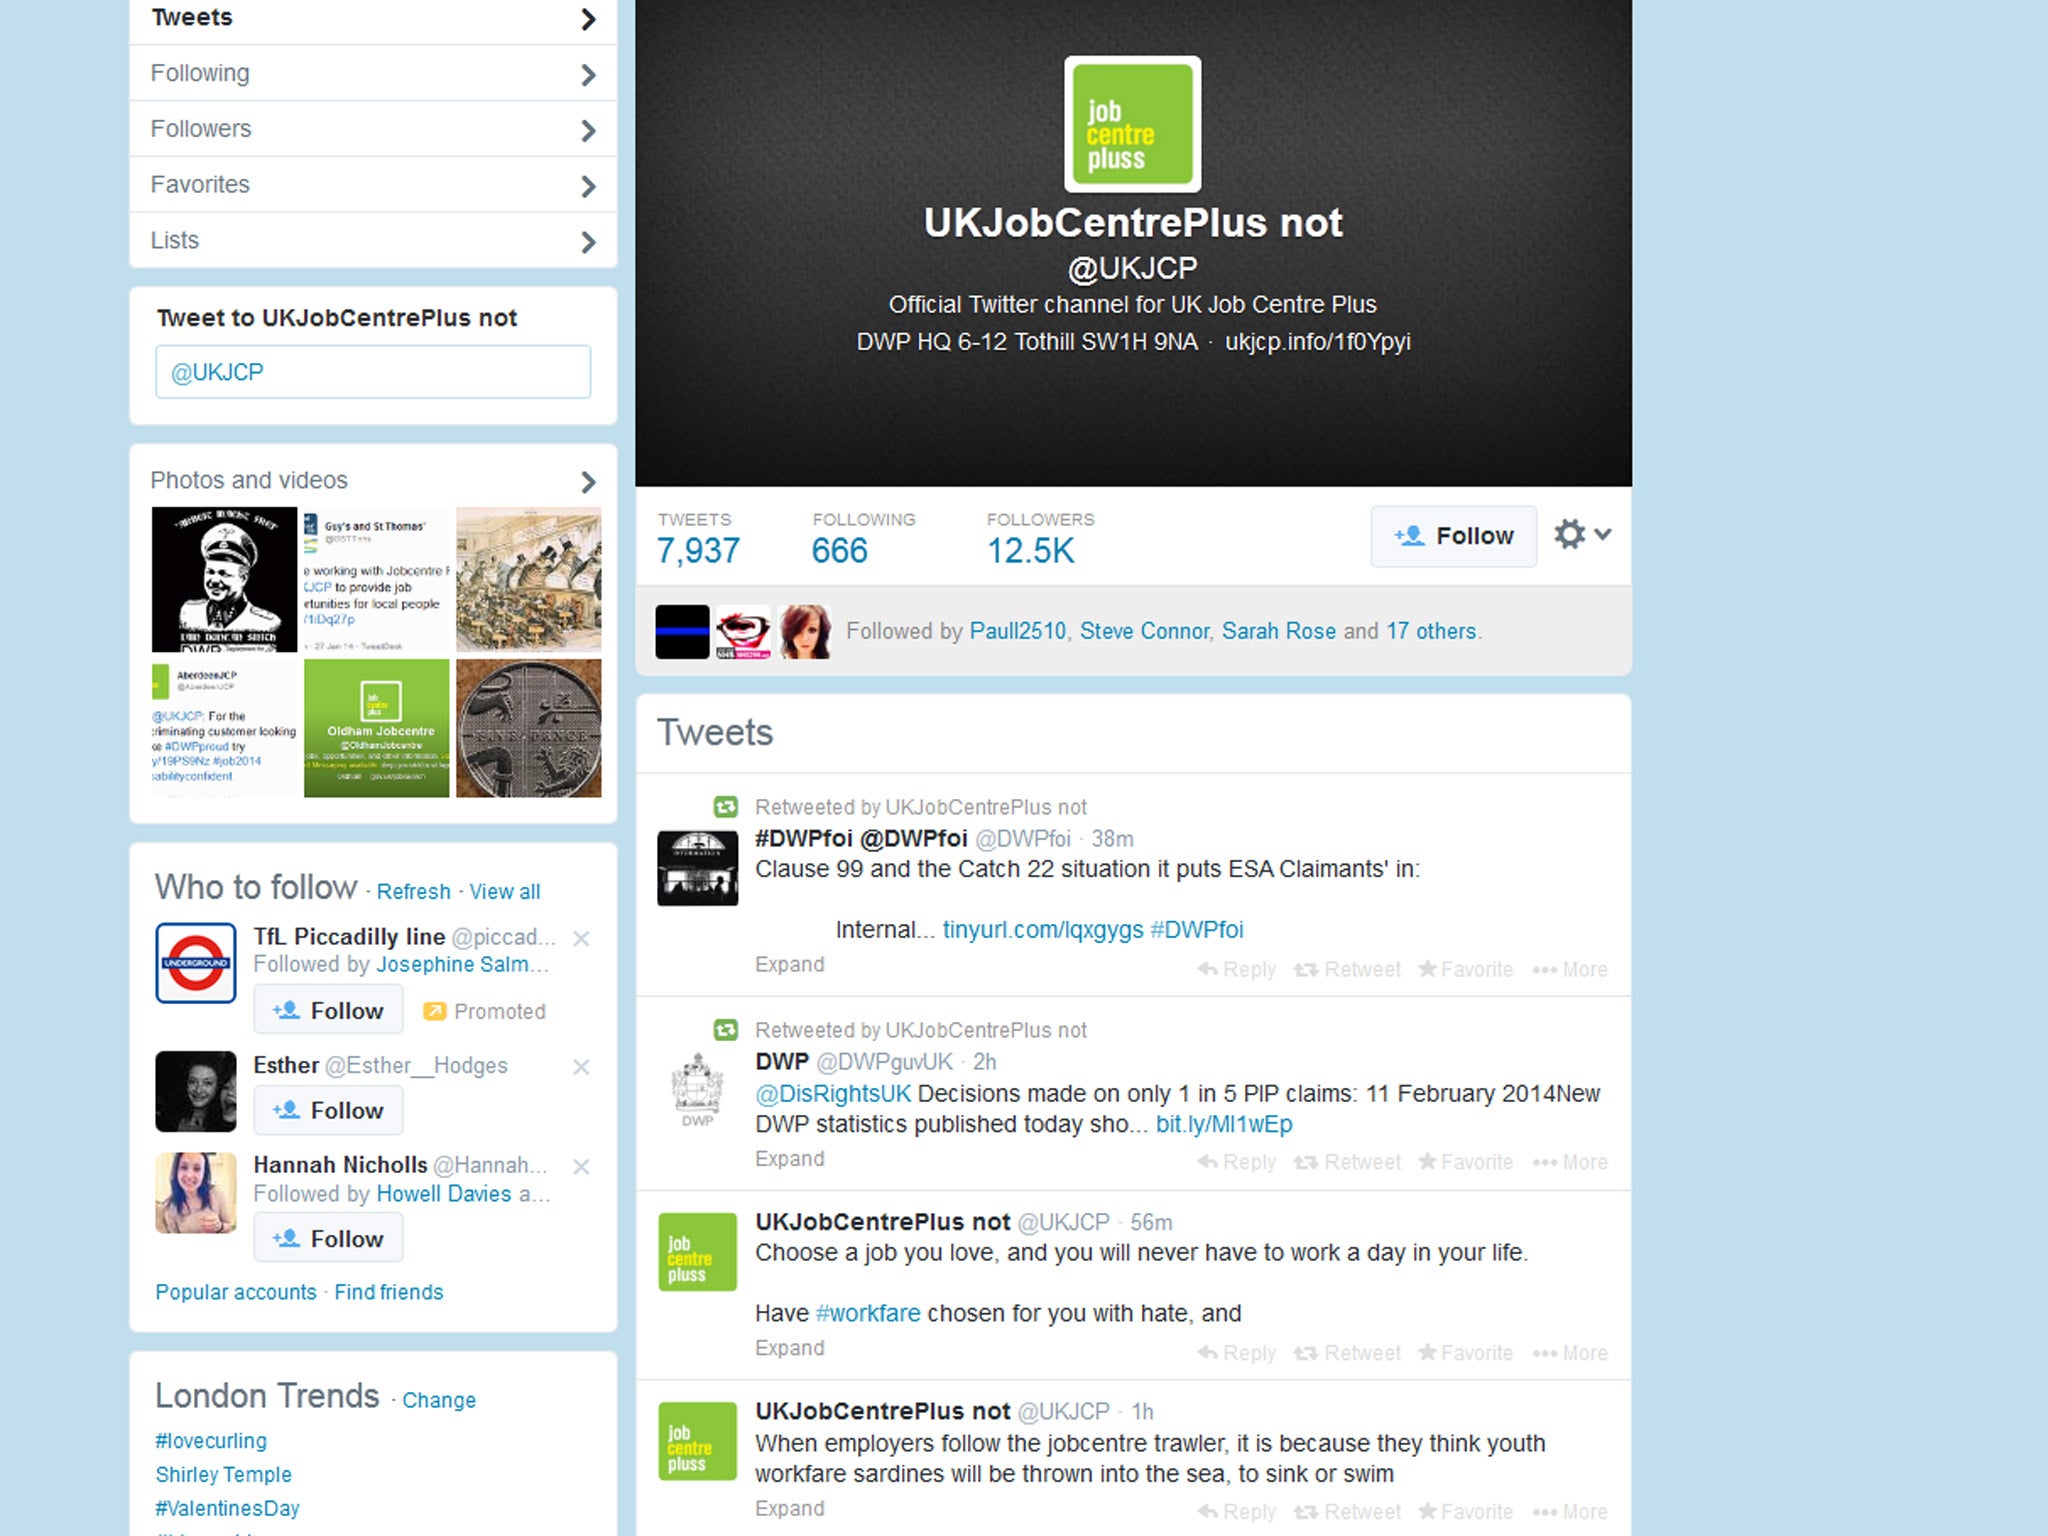 The 'UKJobCentrePlus not' twitter page has been reactivated